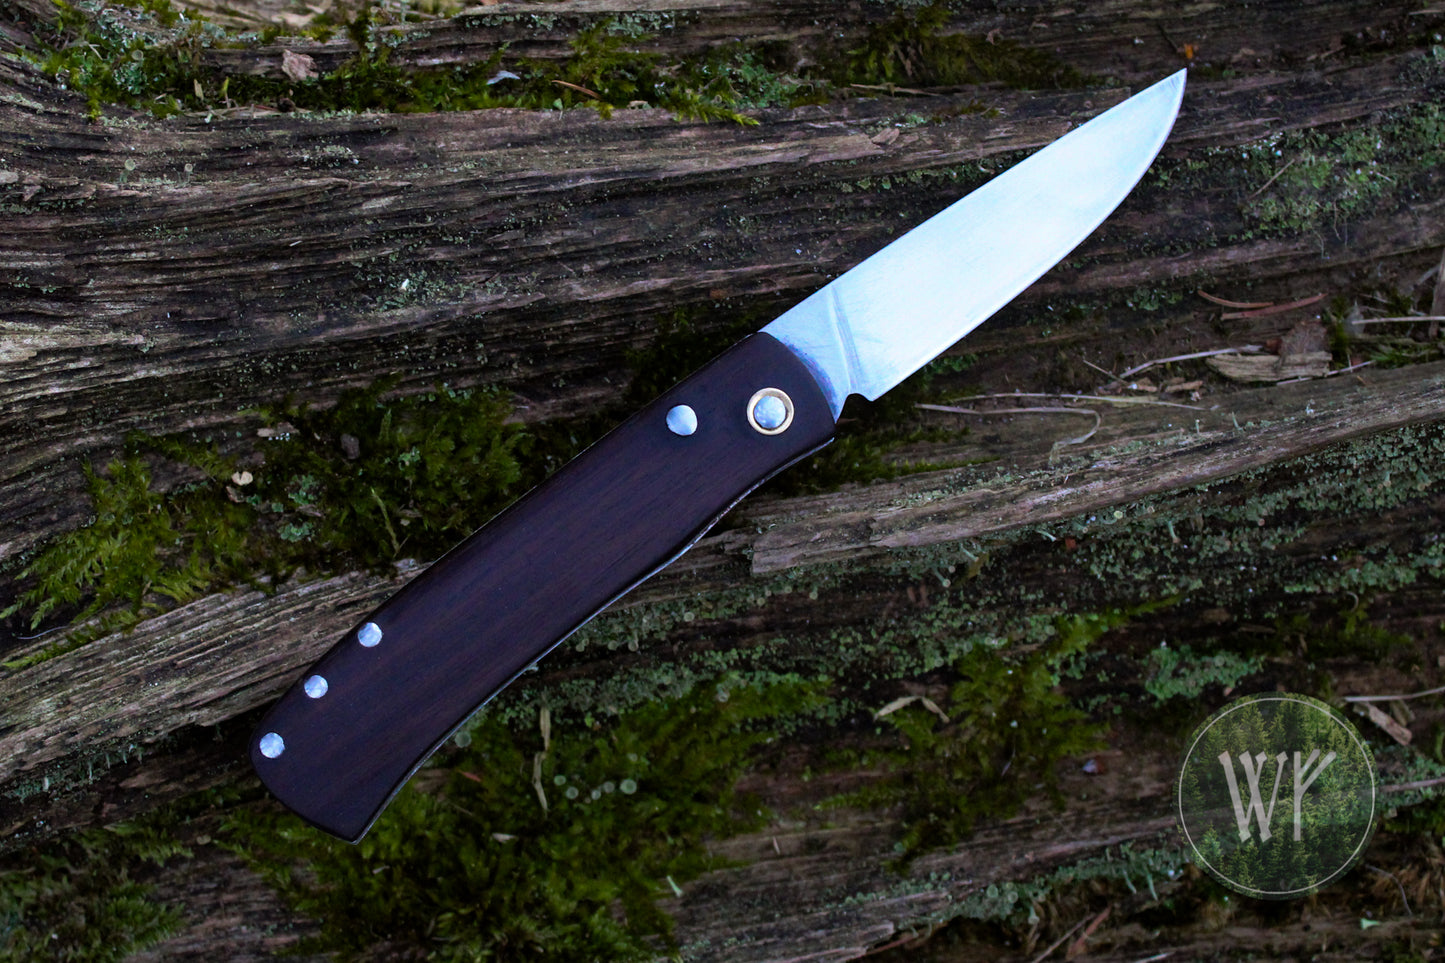 Hand-forged dual-detente folder with 01 Tool Steel blade, Titanium Liners and Rosewood Handle / Non-locking UK Legal Carry